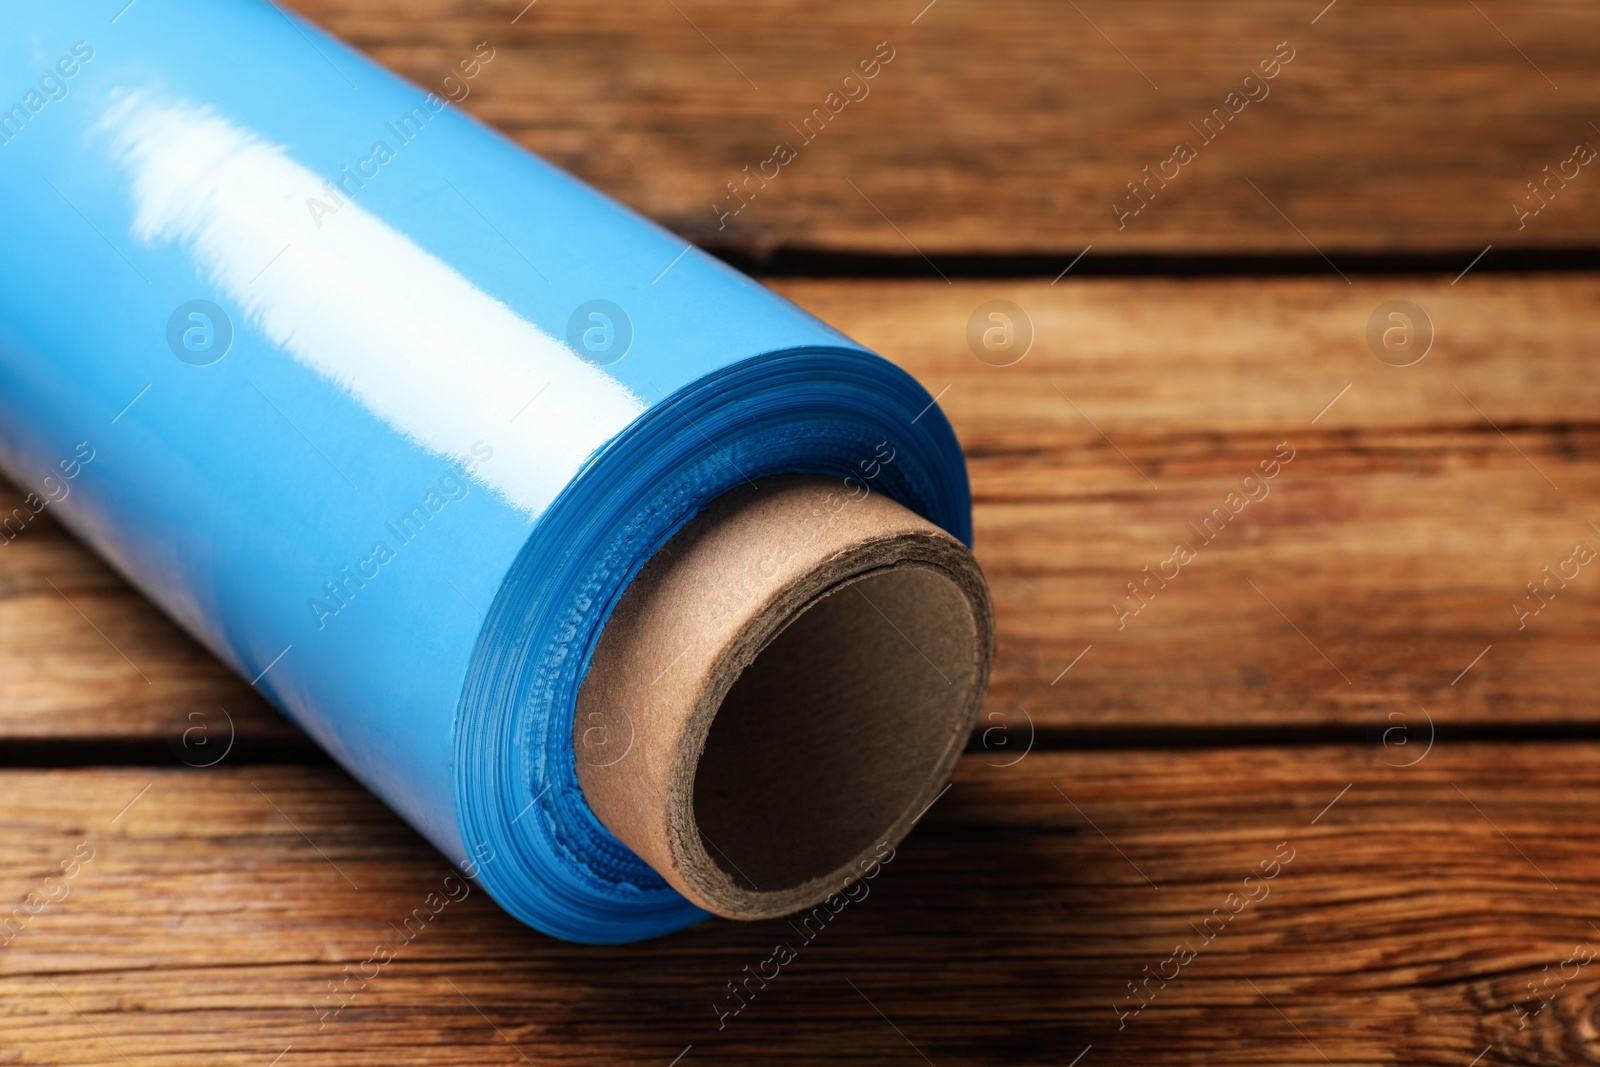 Photo of Roll of plastic stretch wrap film on wooden table, closeup